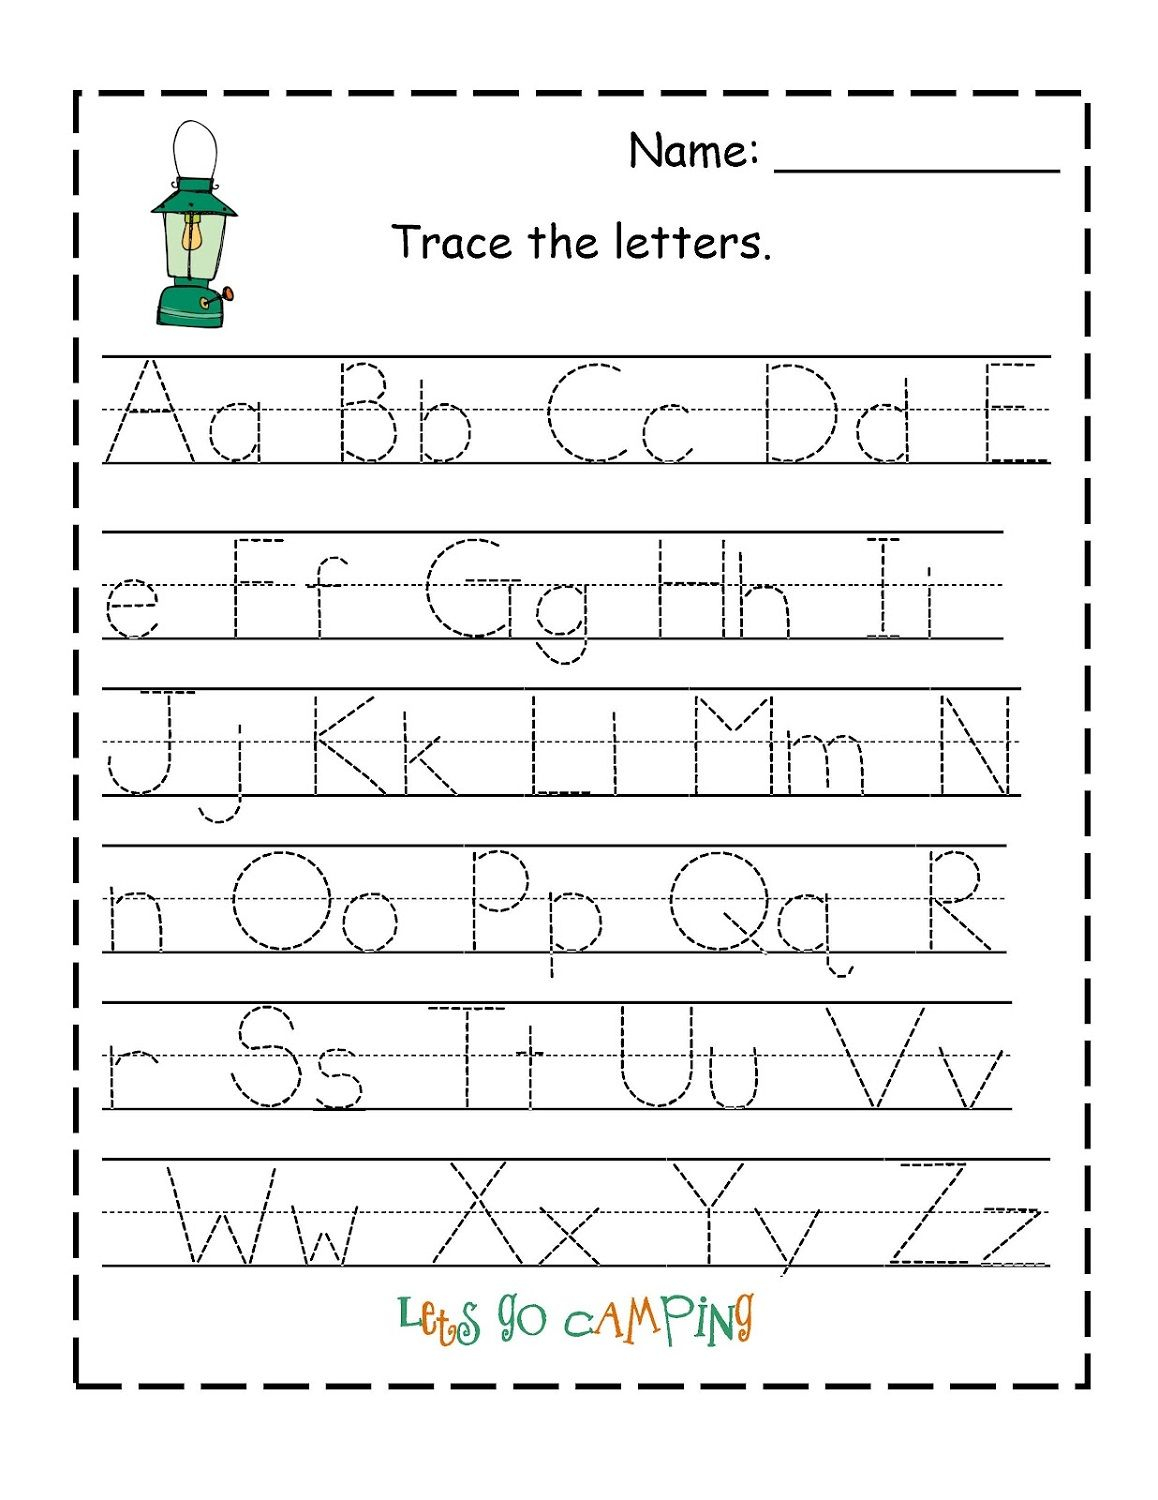 Traceable Alphabet Worksheets A-Z In 2020 | Alphabet within Name Tracing A-Z